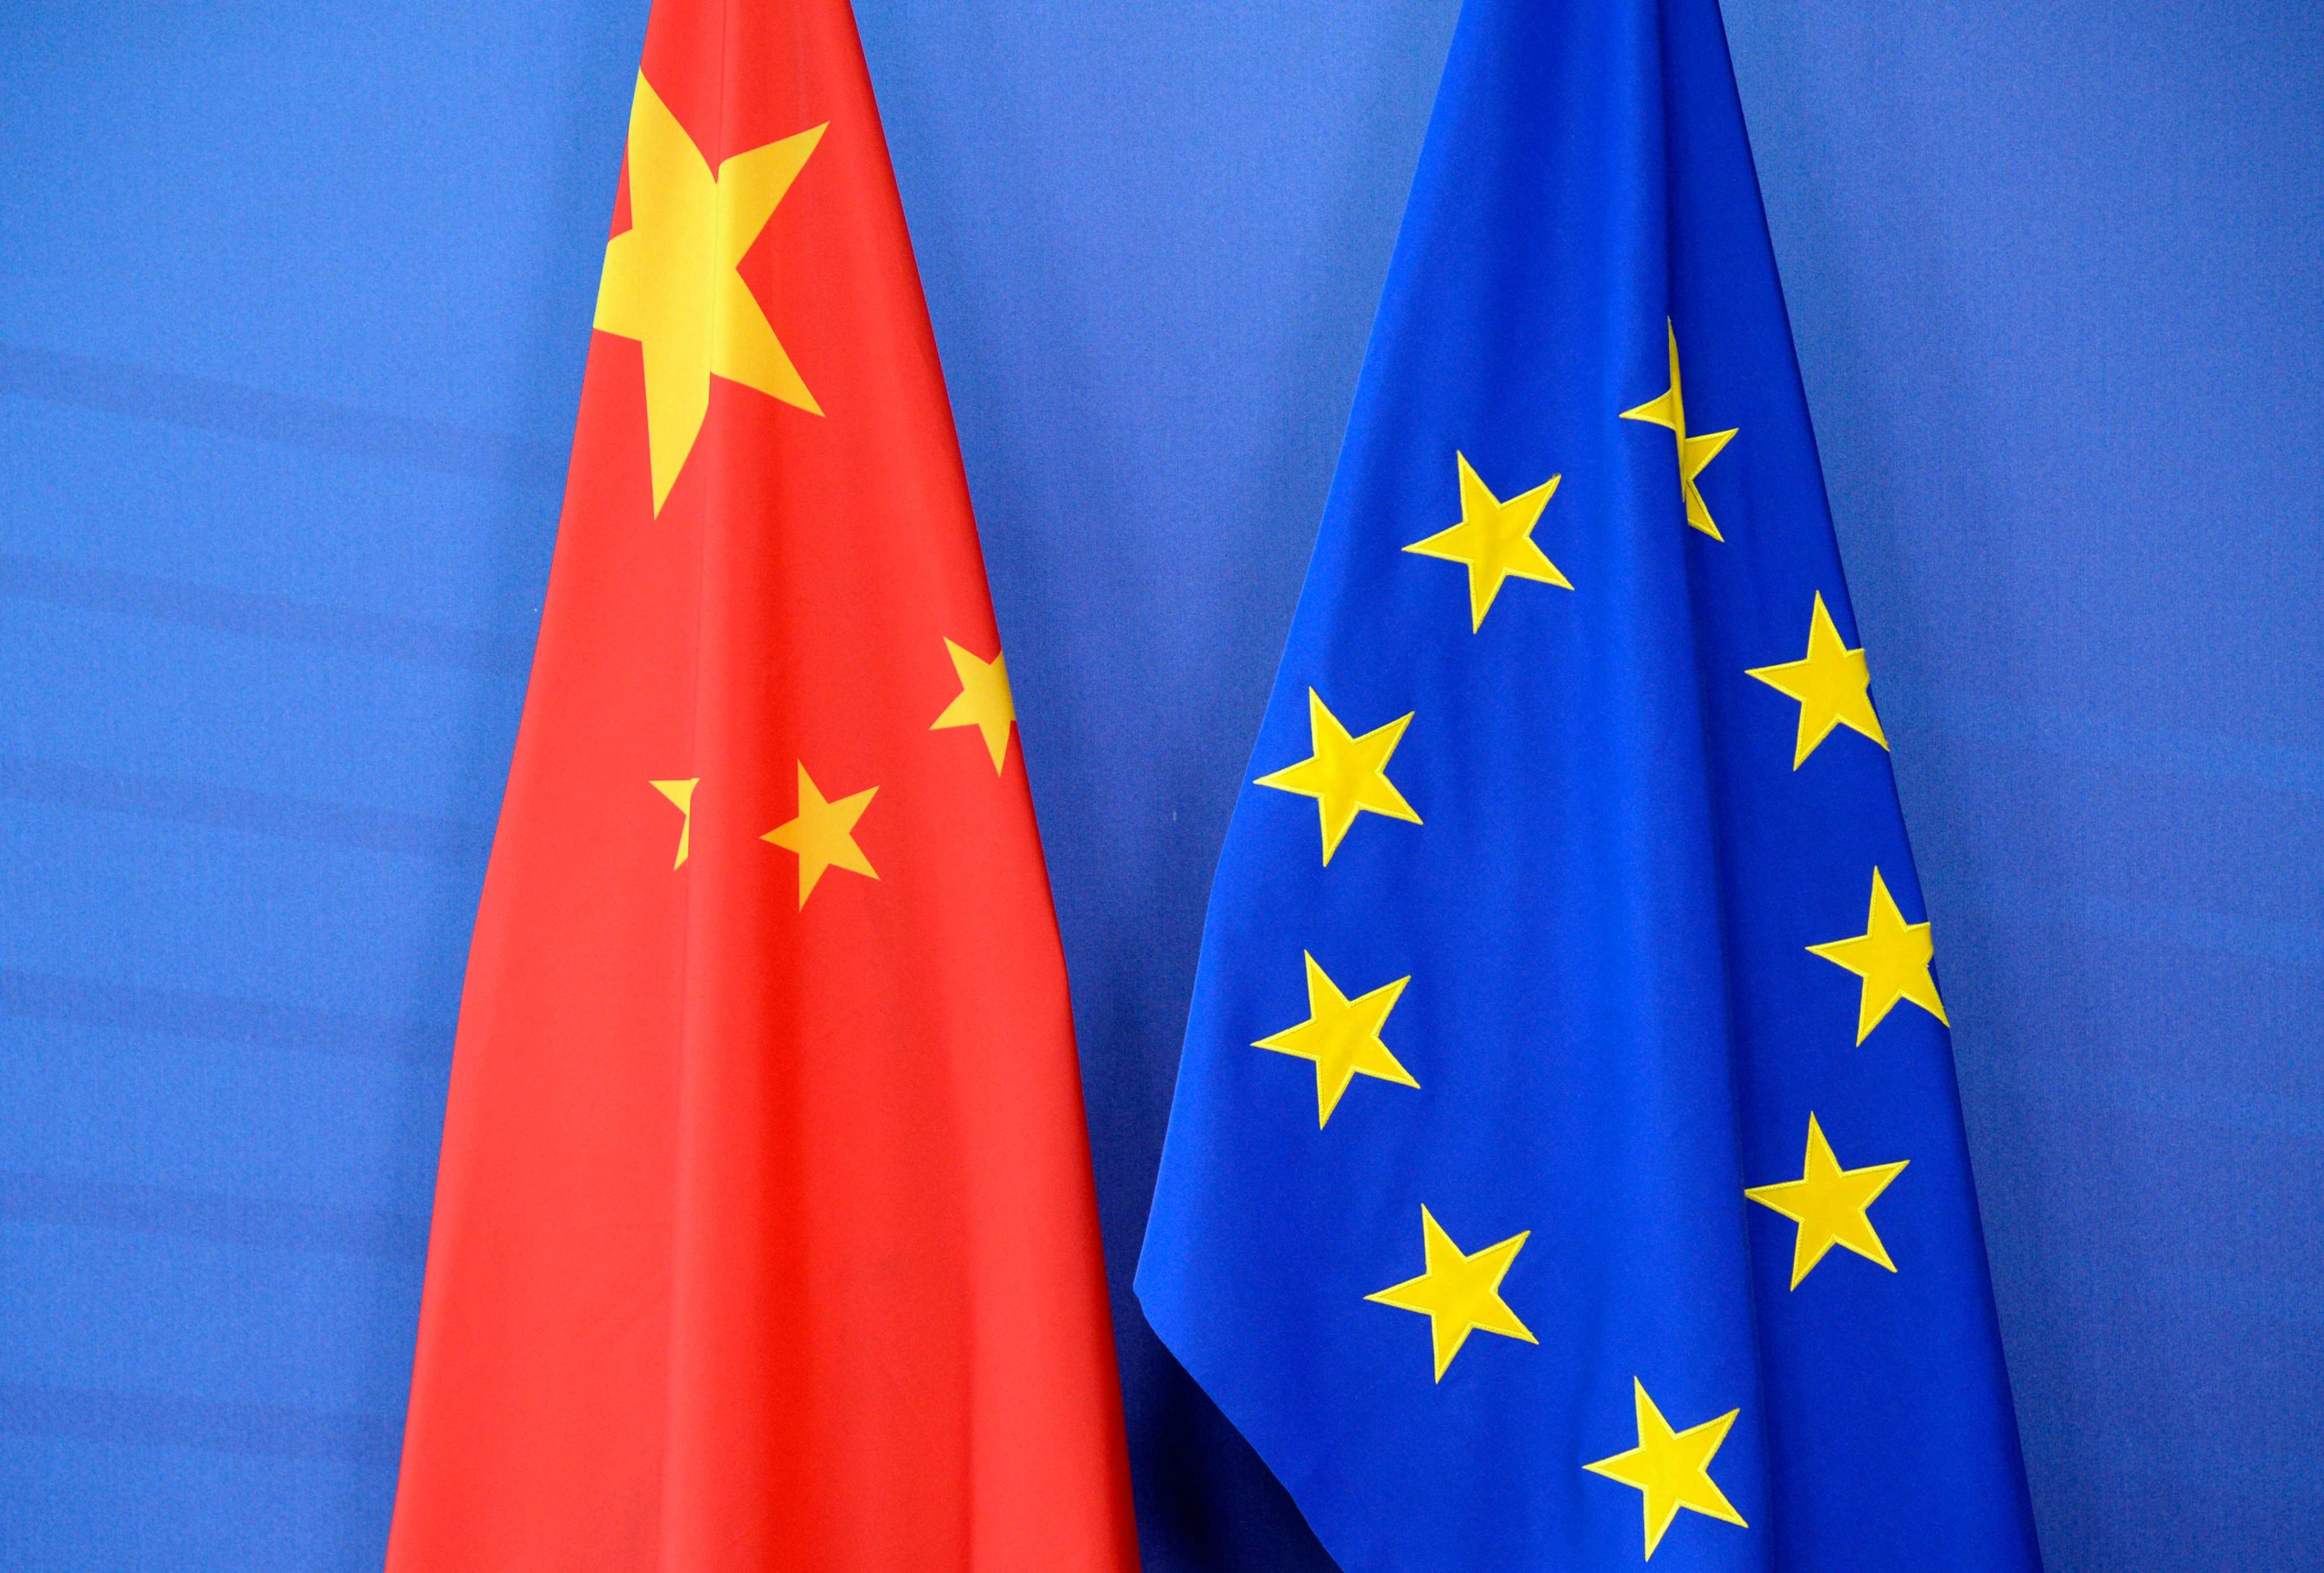 A new EU regulatory tool appears to be aimed at discouraging Chinese companies from operating in European Union member states. Photo: AFP